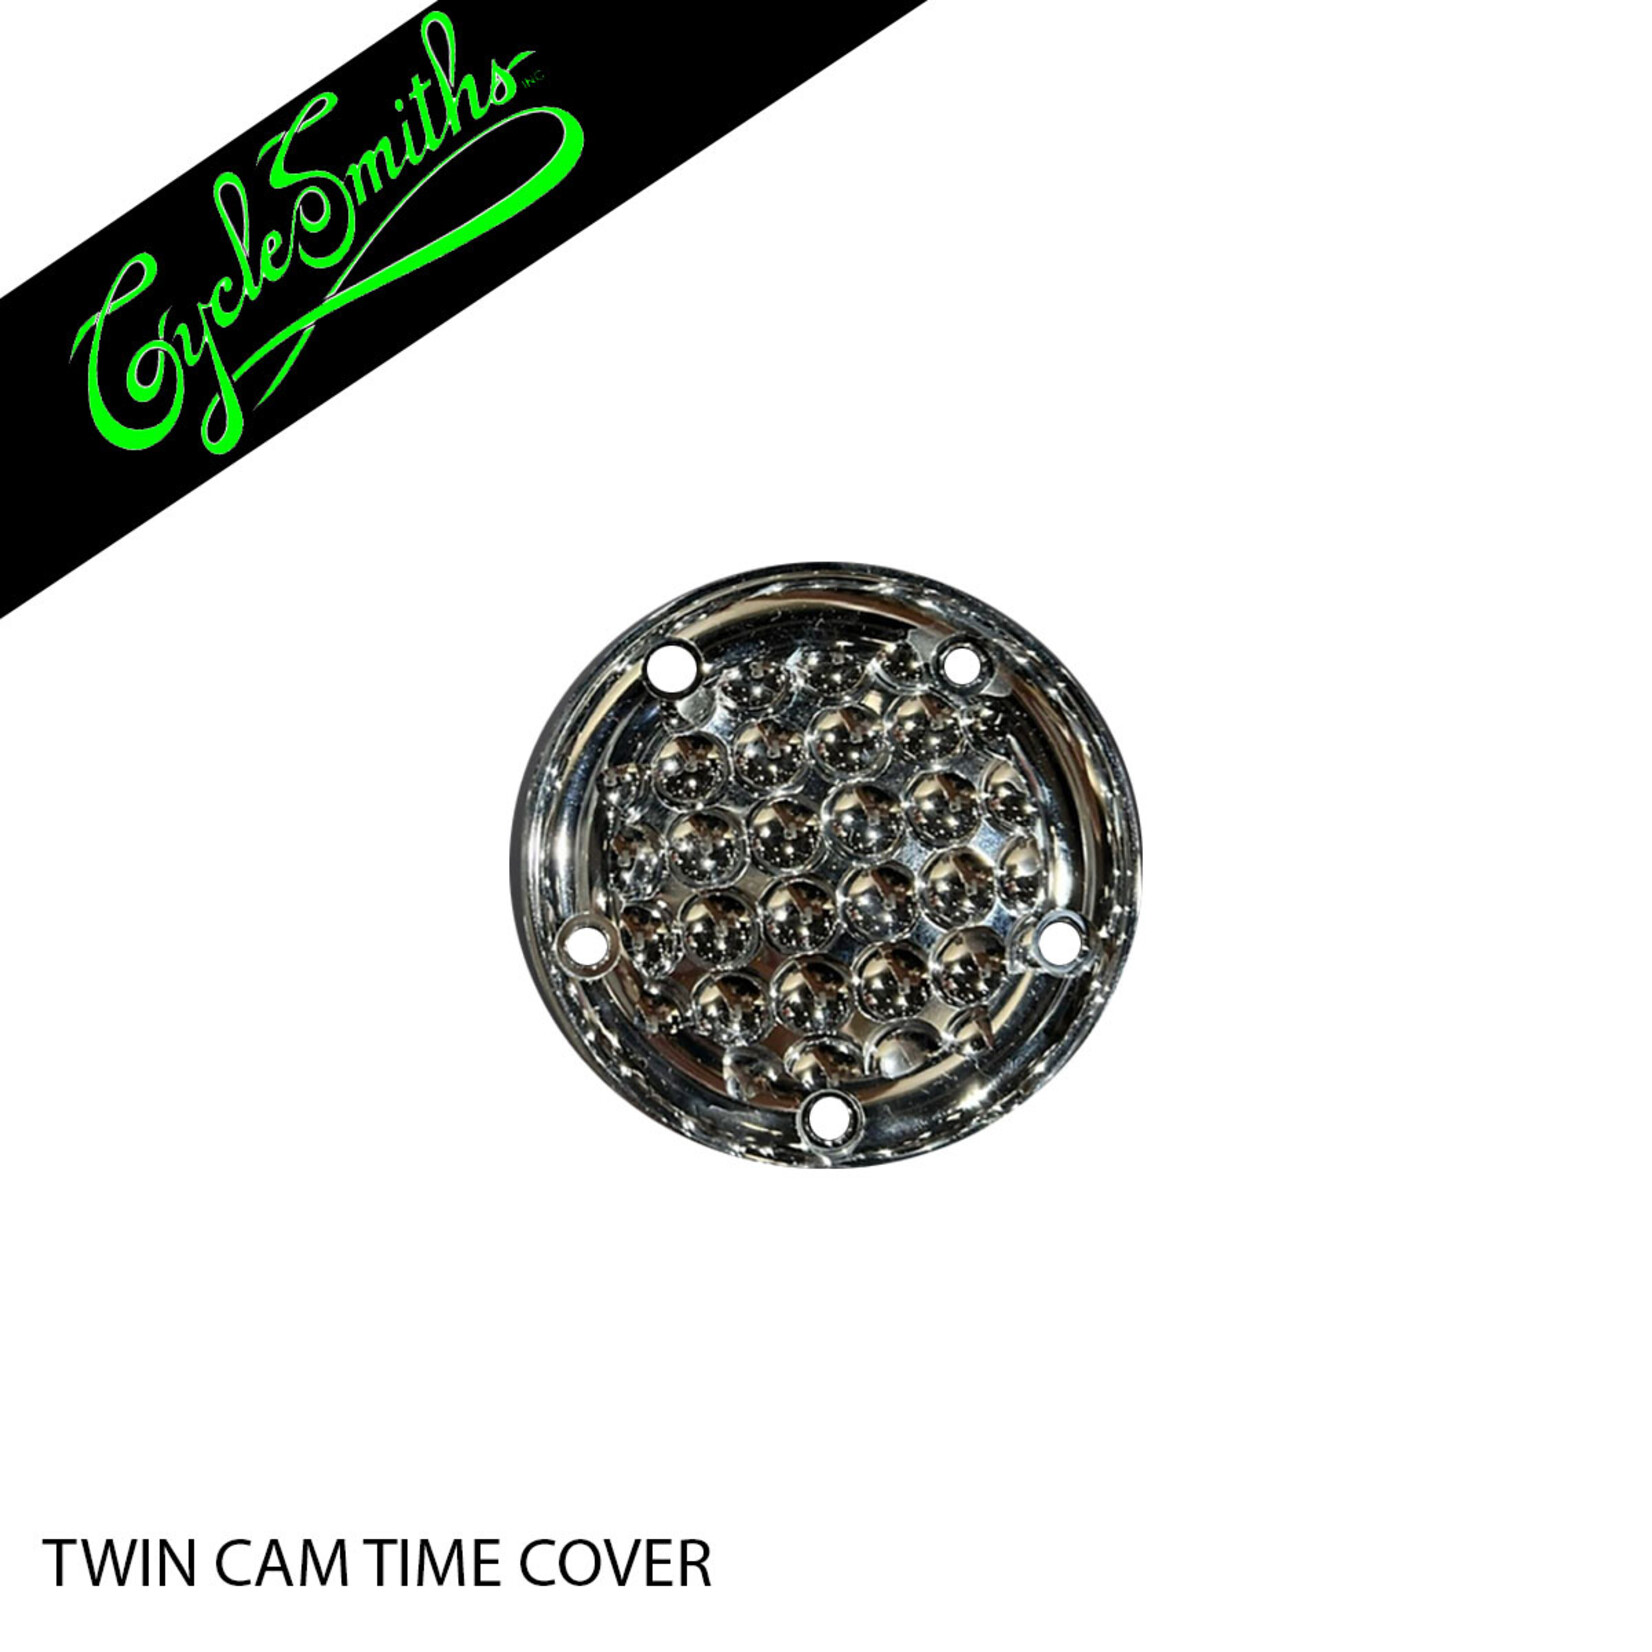 CYCLE SMITHS CYCLESMITHS SHREDDER TIMER COVER - CHROME